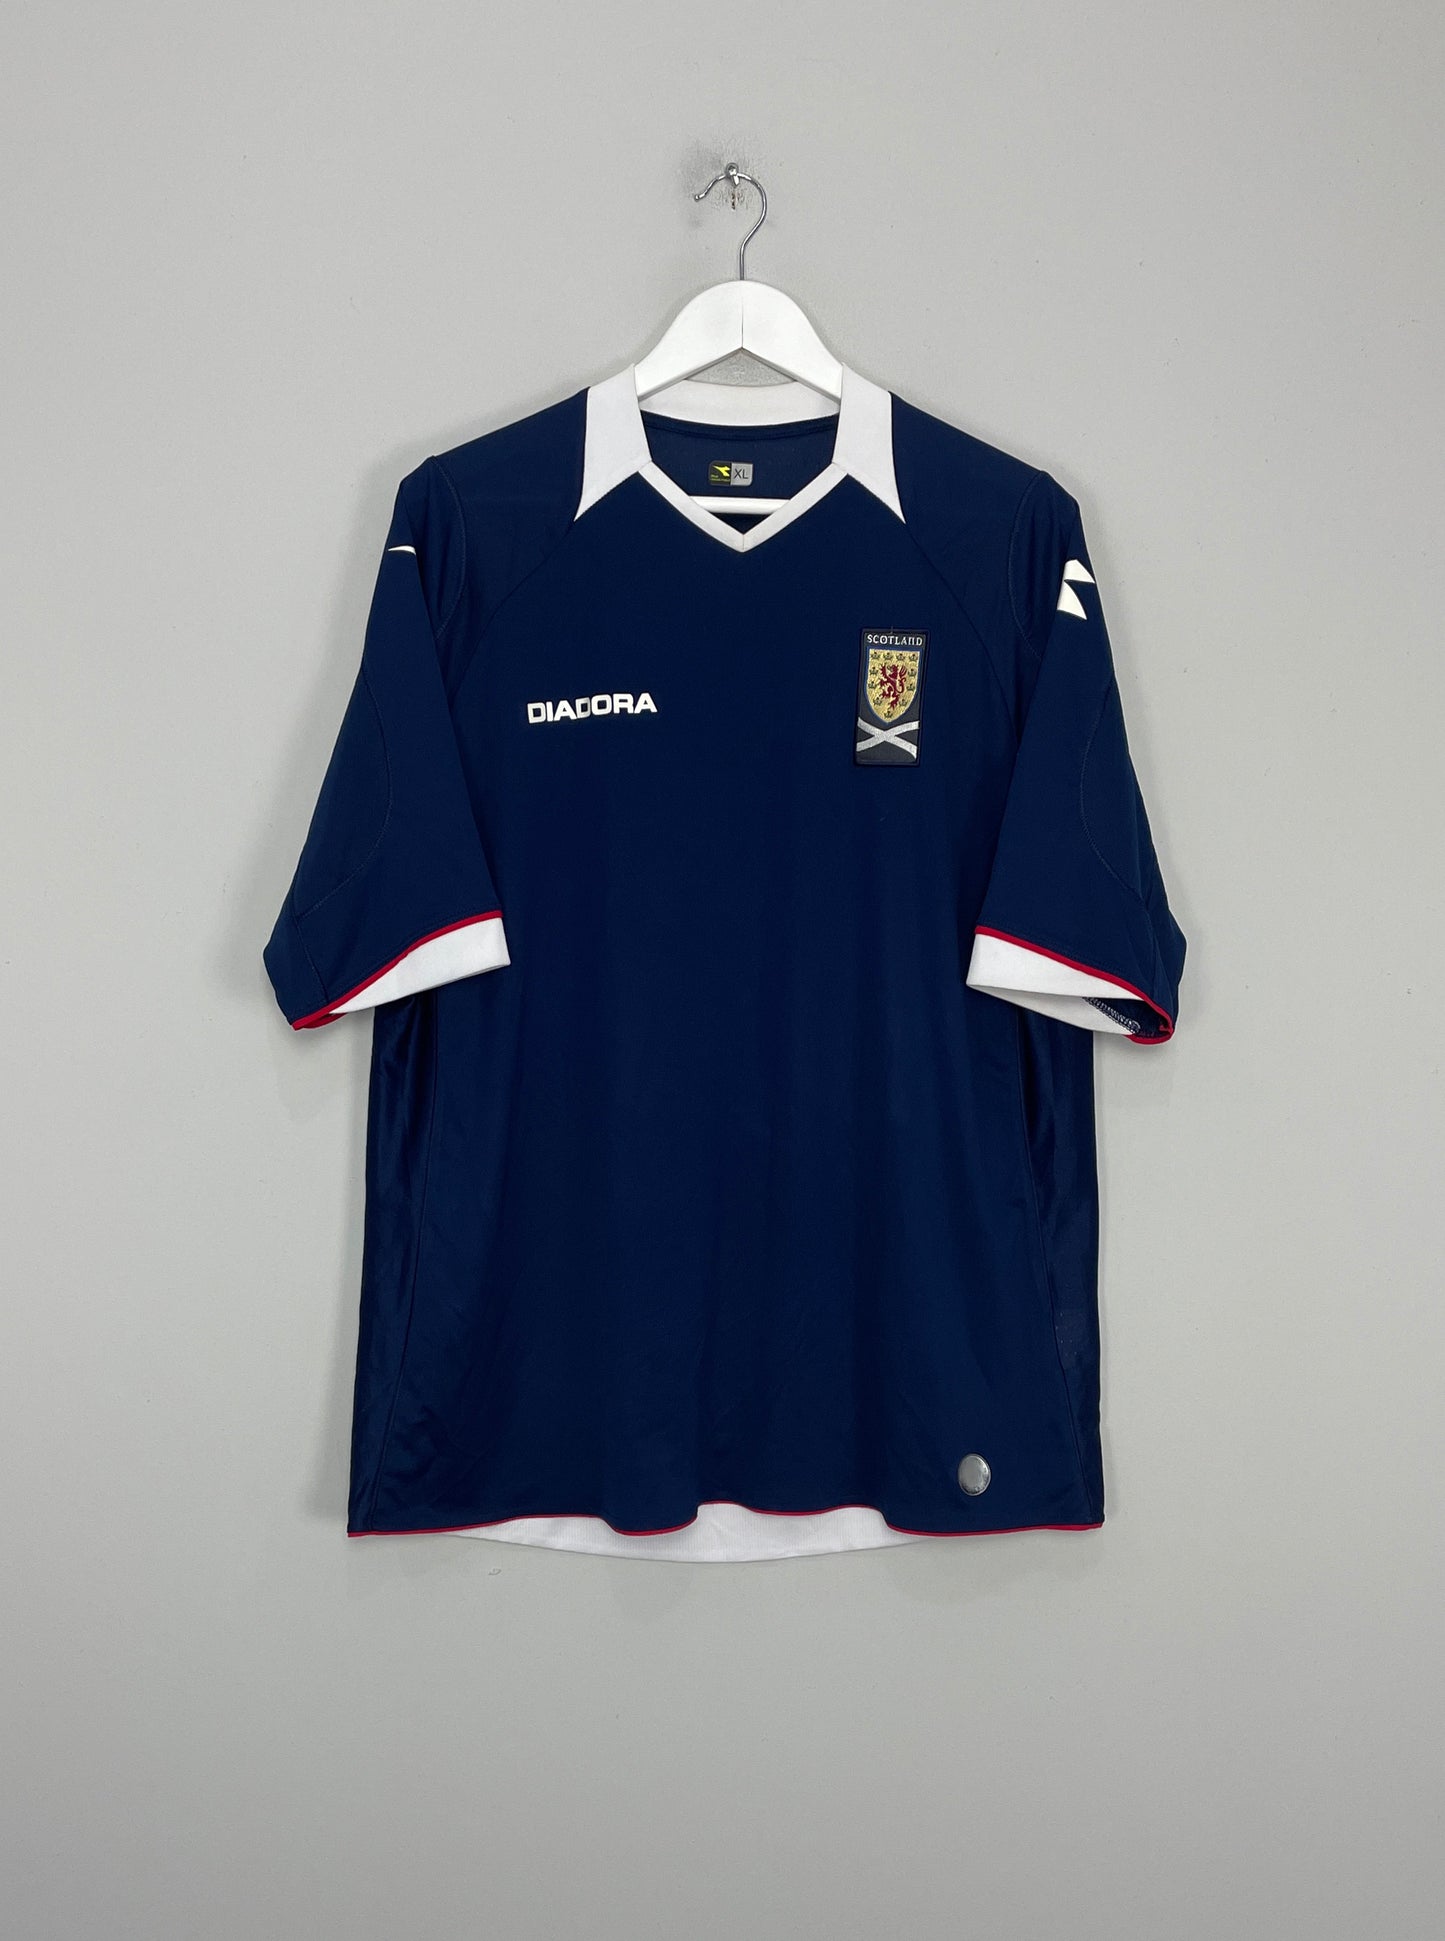 Image of the Scotland shirt from the 2008/09 season